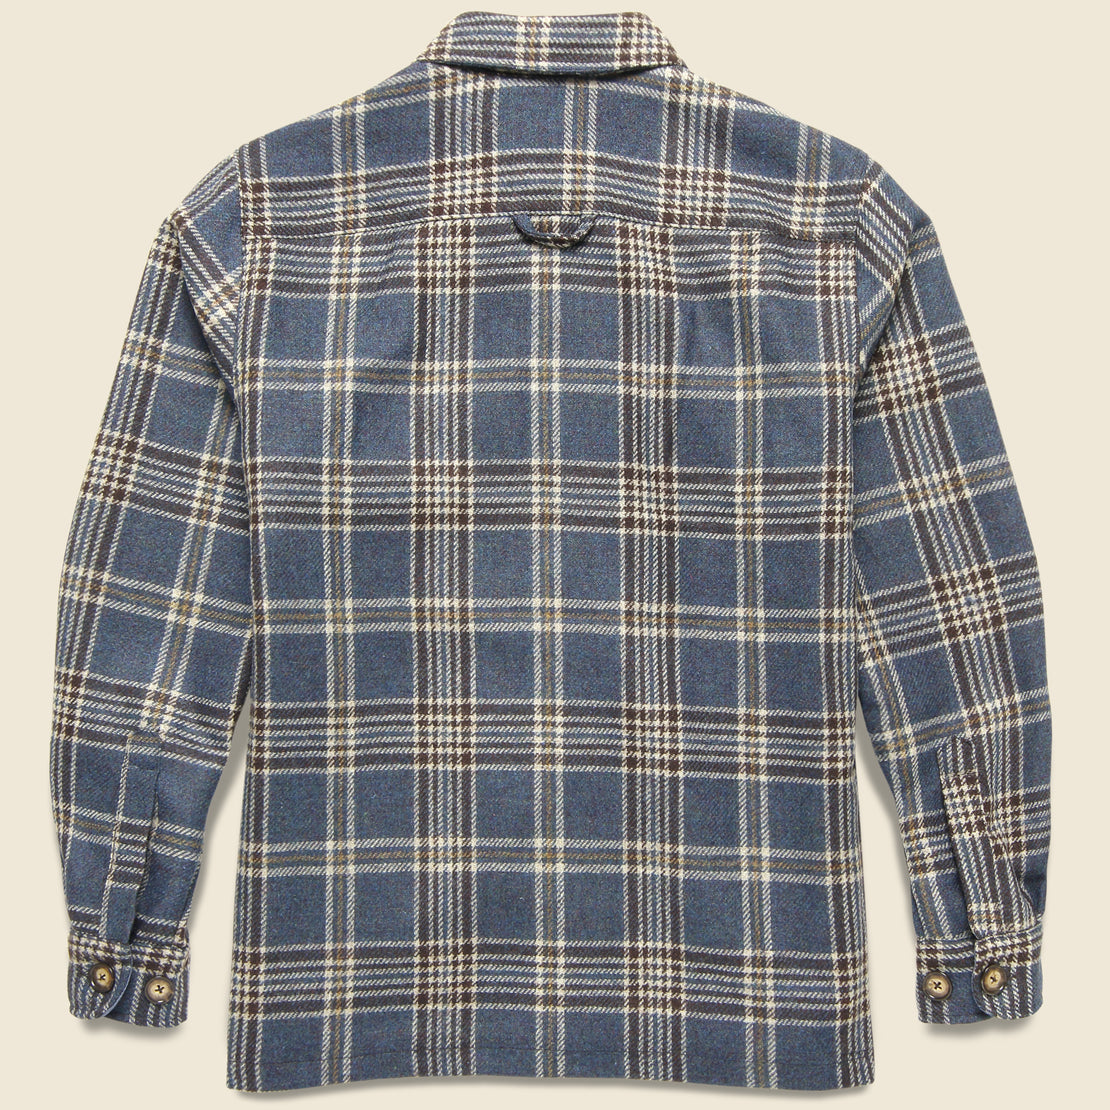 Wool Mesc Overshirt - Blue/Brown Plaid - Portuguese Flannel - STAG Provisions - Tops - L/S Woven - Overshirt